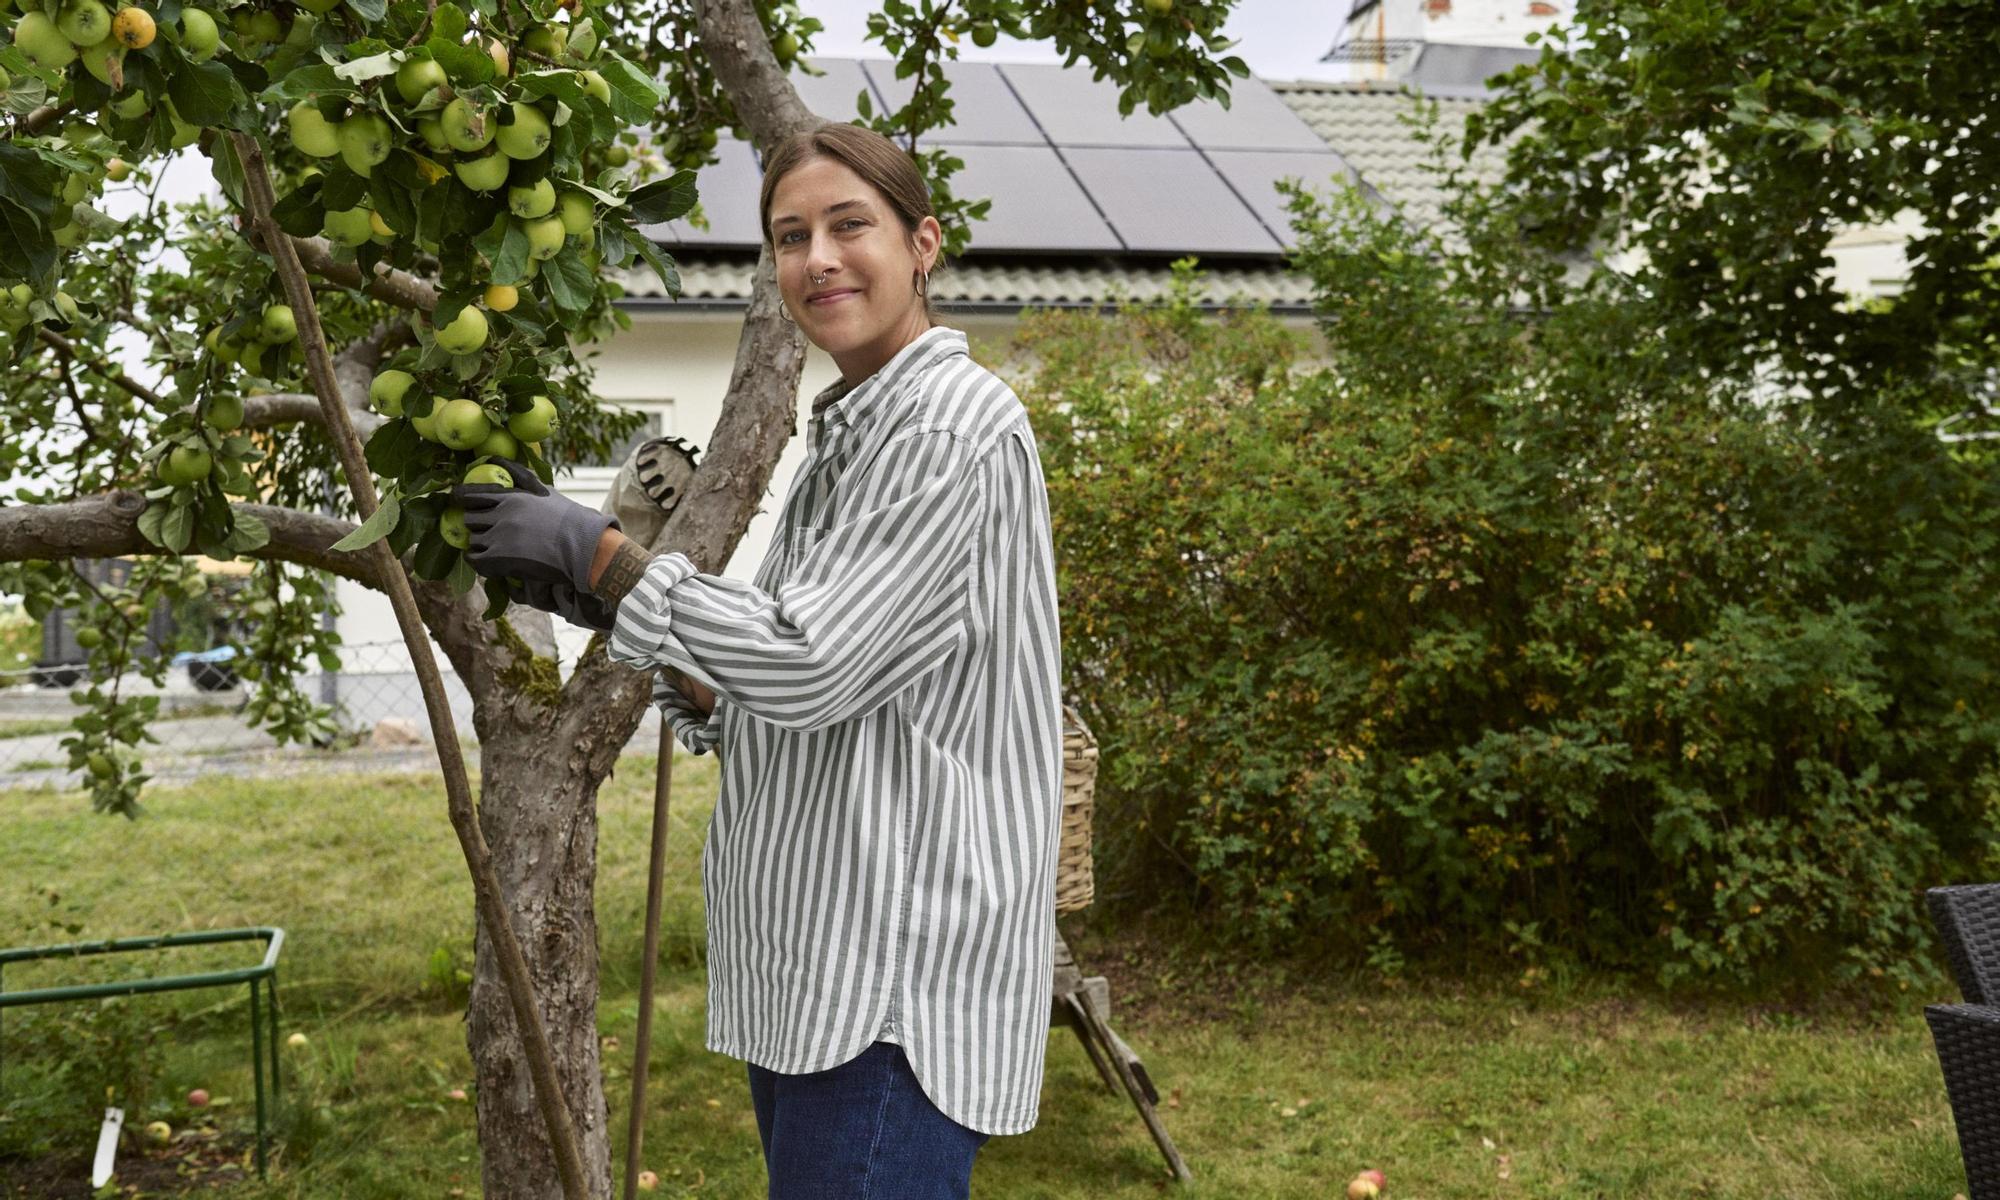 Woman picking apples. Solar panels in the background